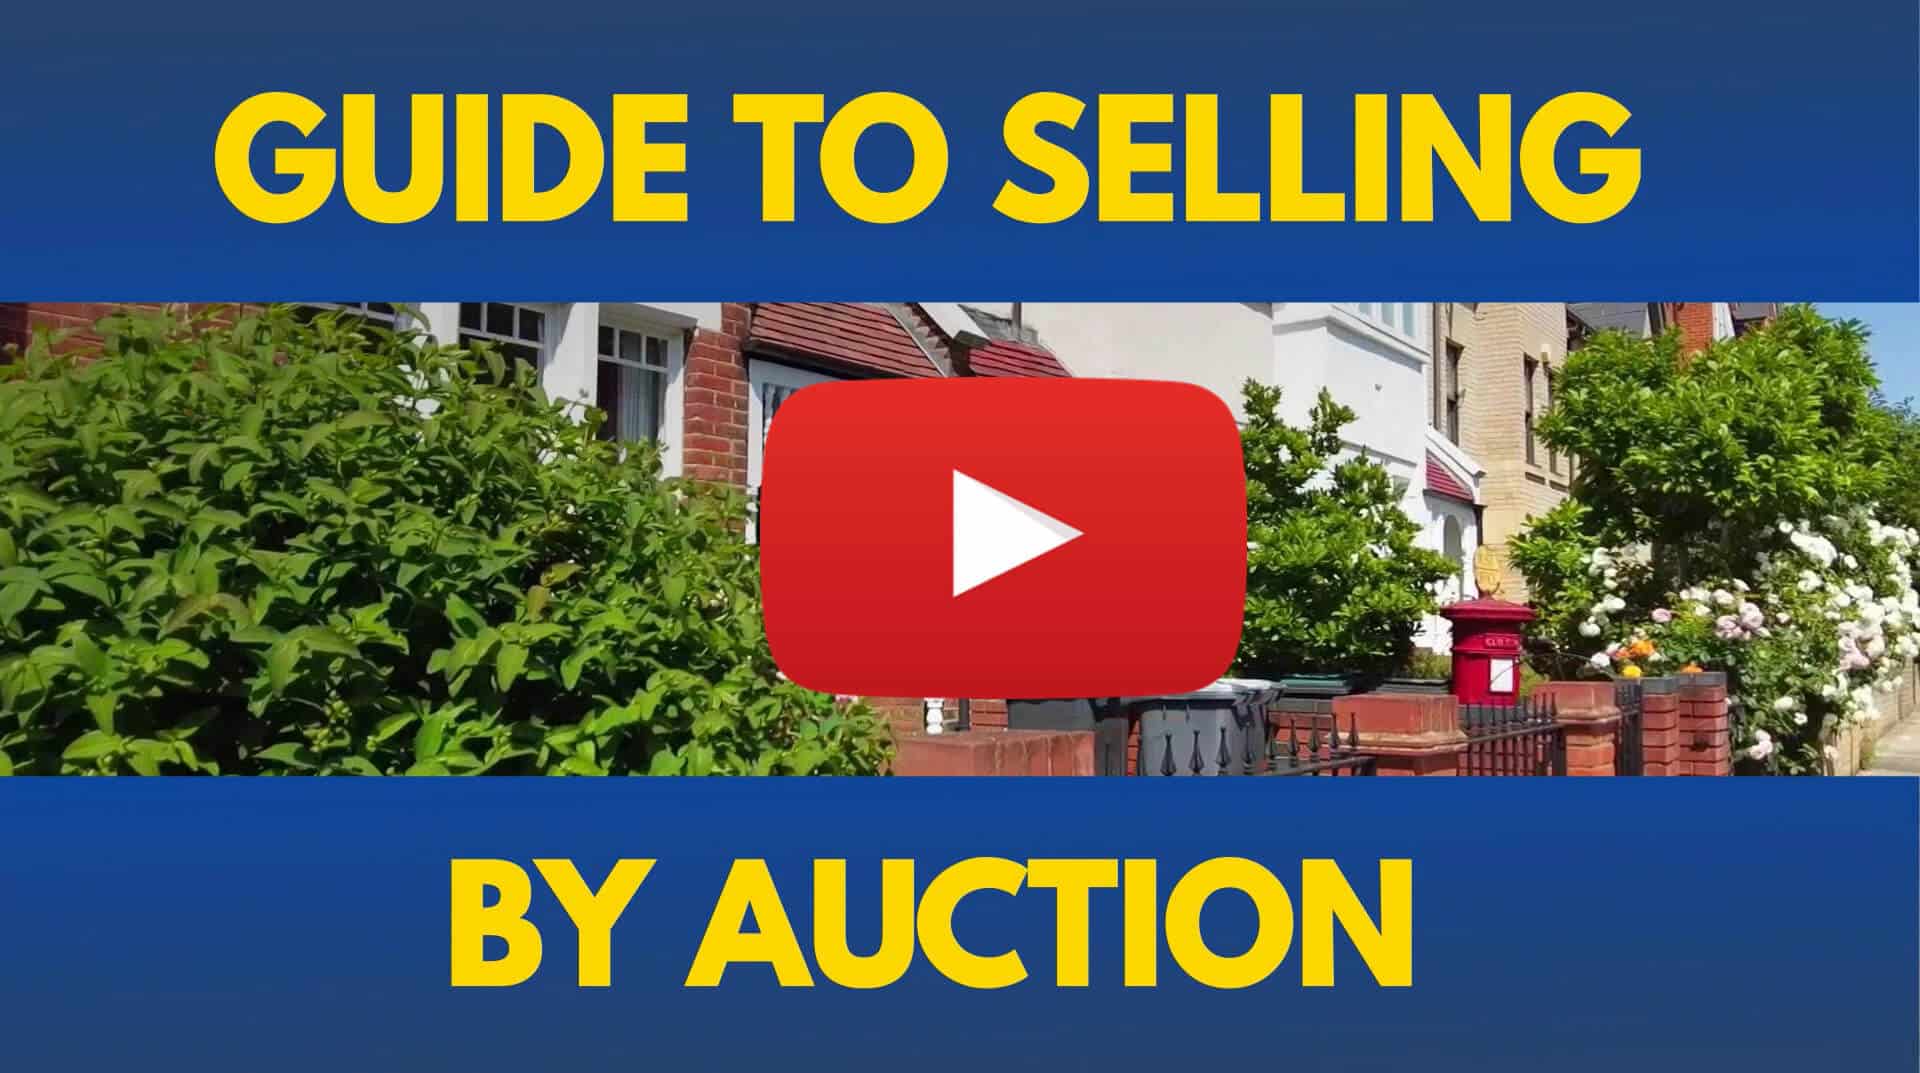 Guide to Selling by Auction - link to youtube video